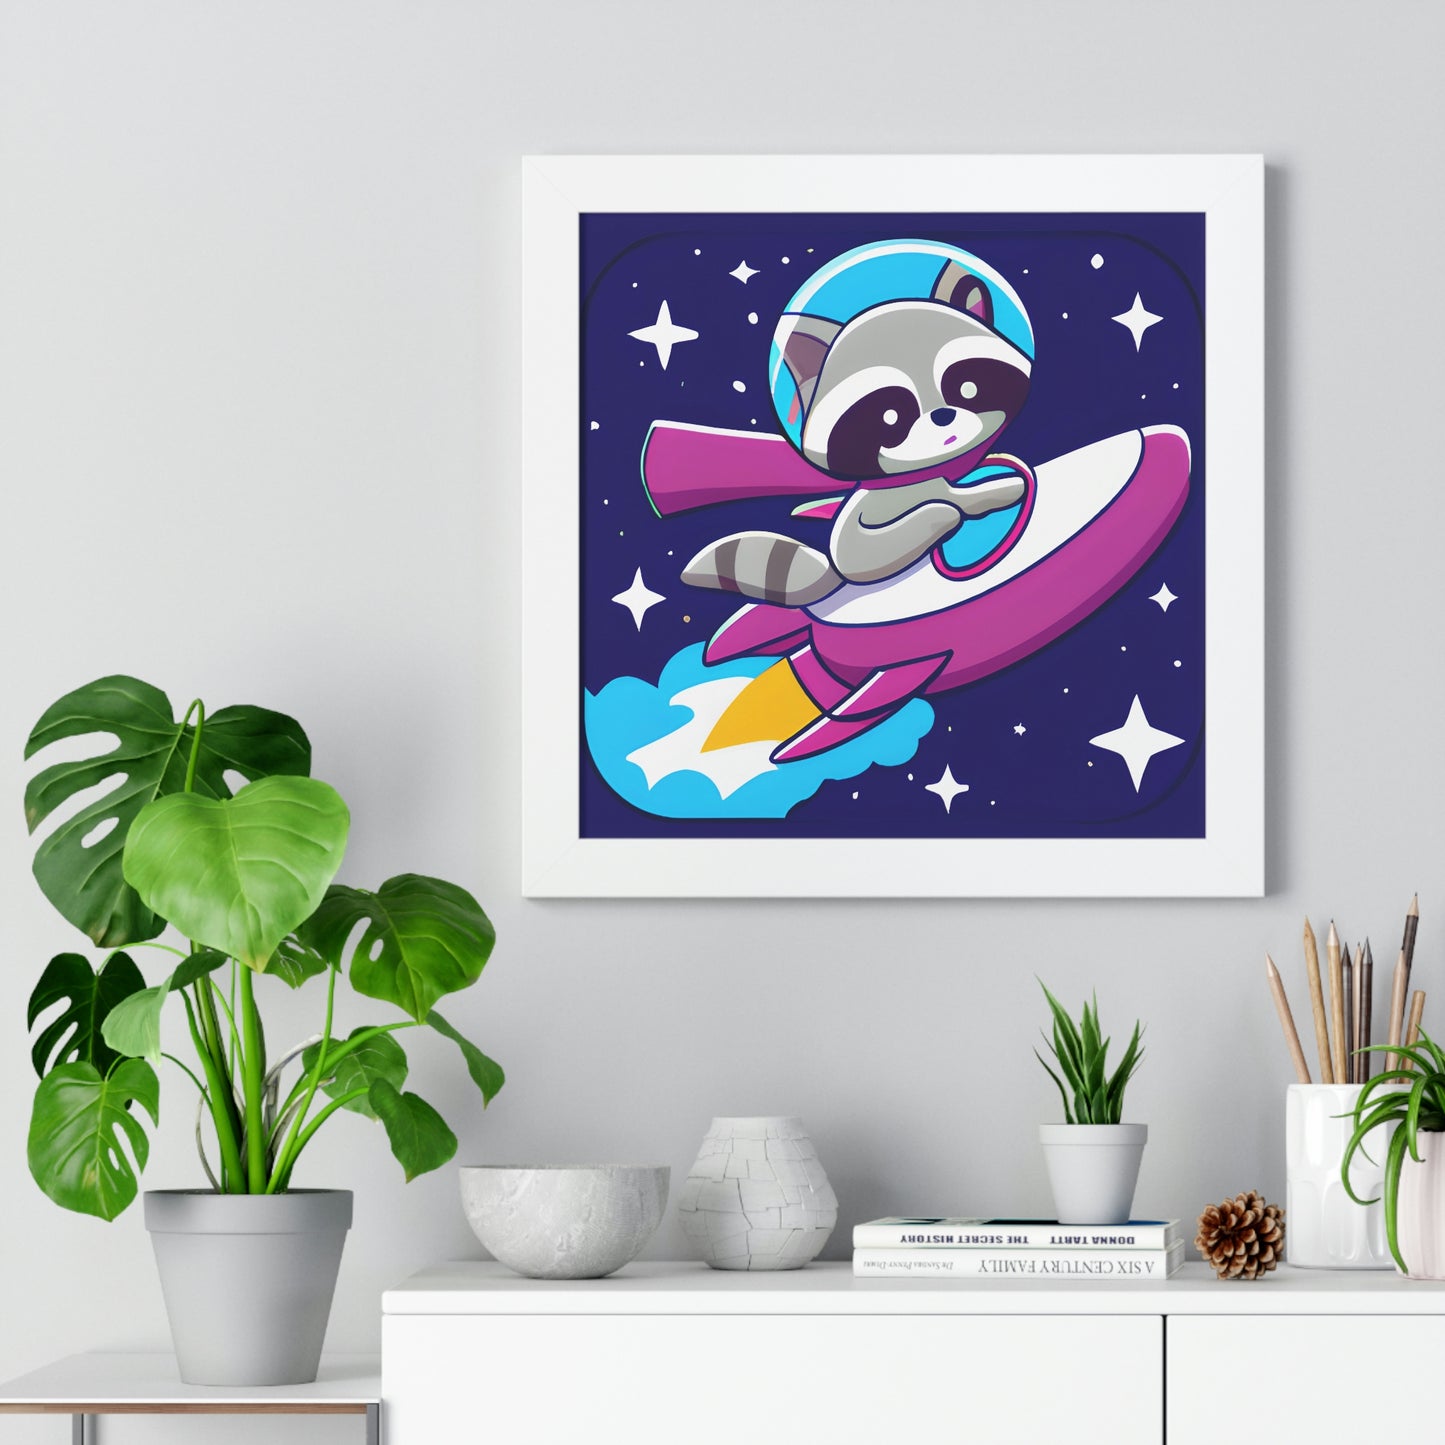 Space Cadet Jerry Framed Poster - Raccoon Paradise